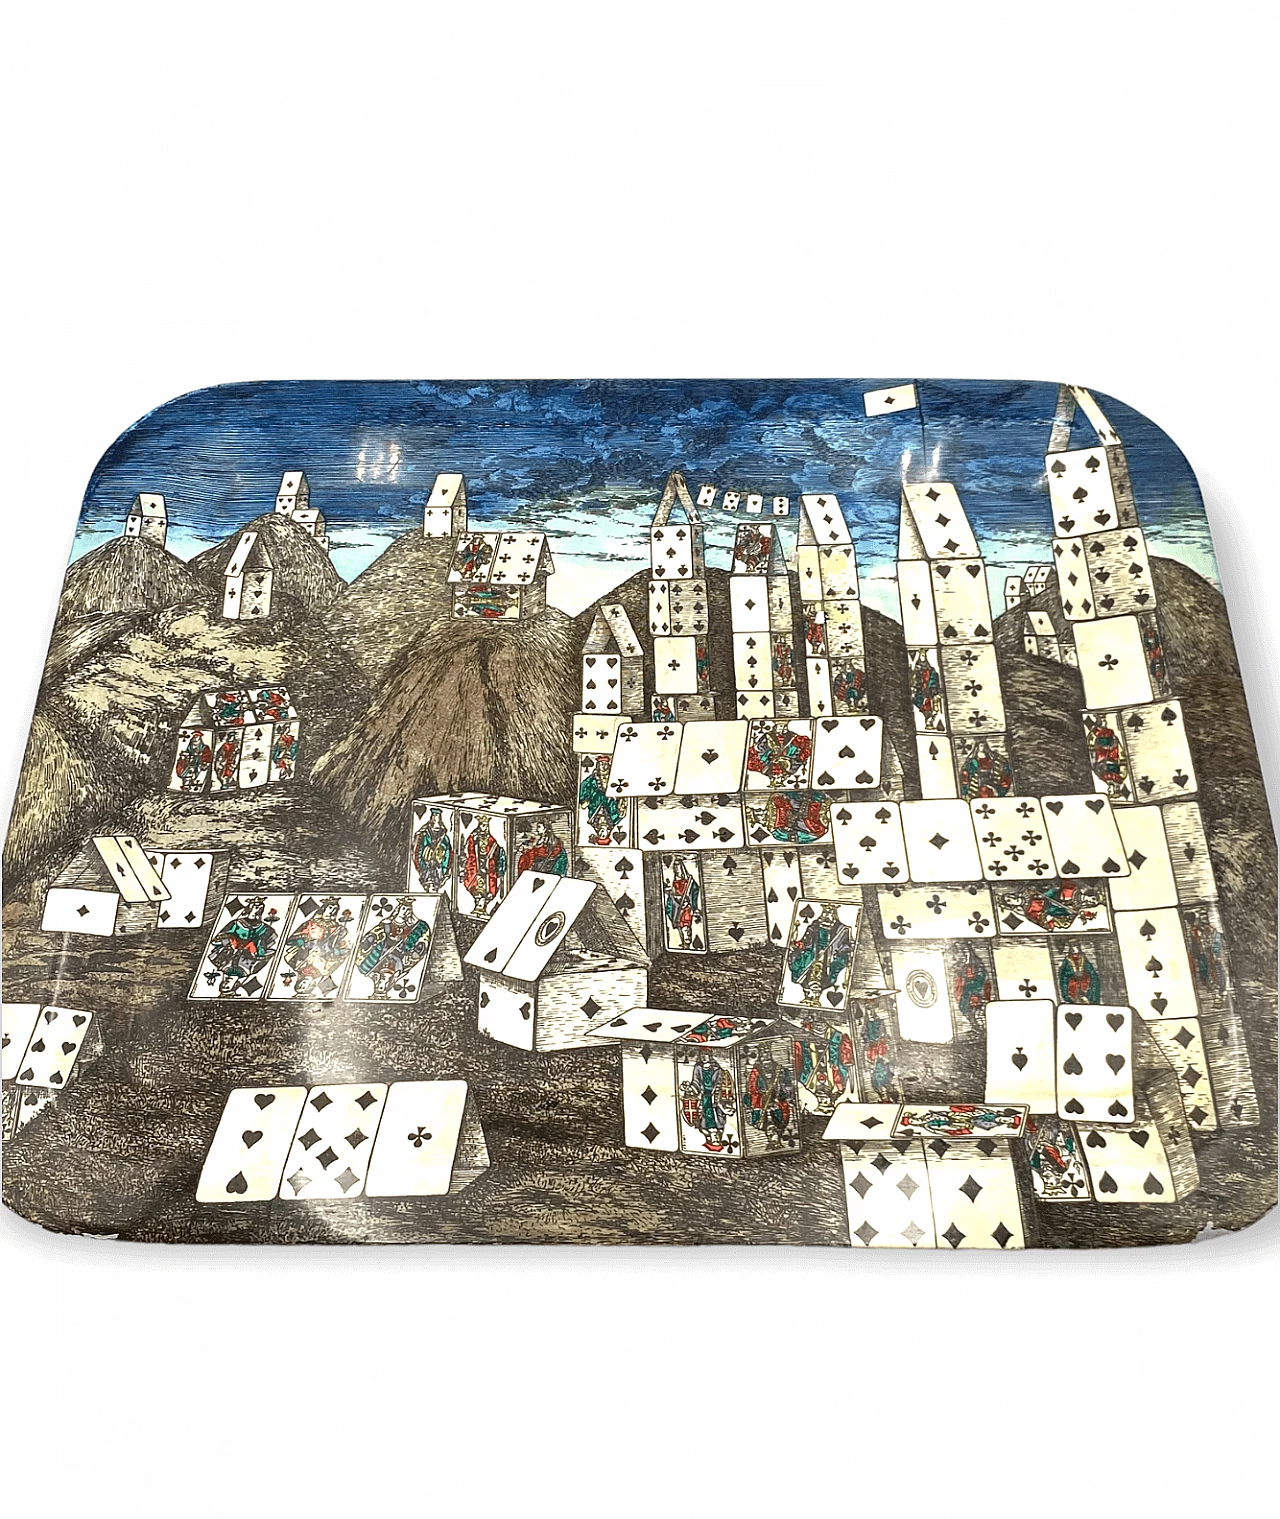 Folding City of Cards coffee table by Piero Fornasetti, 1950s 13